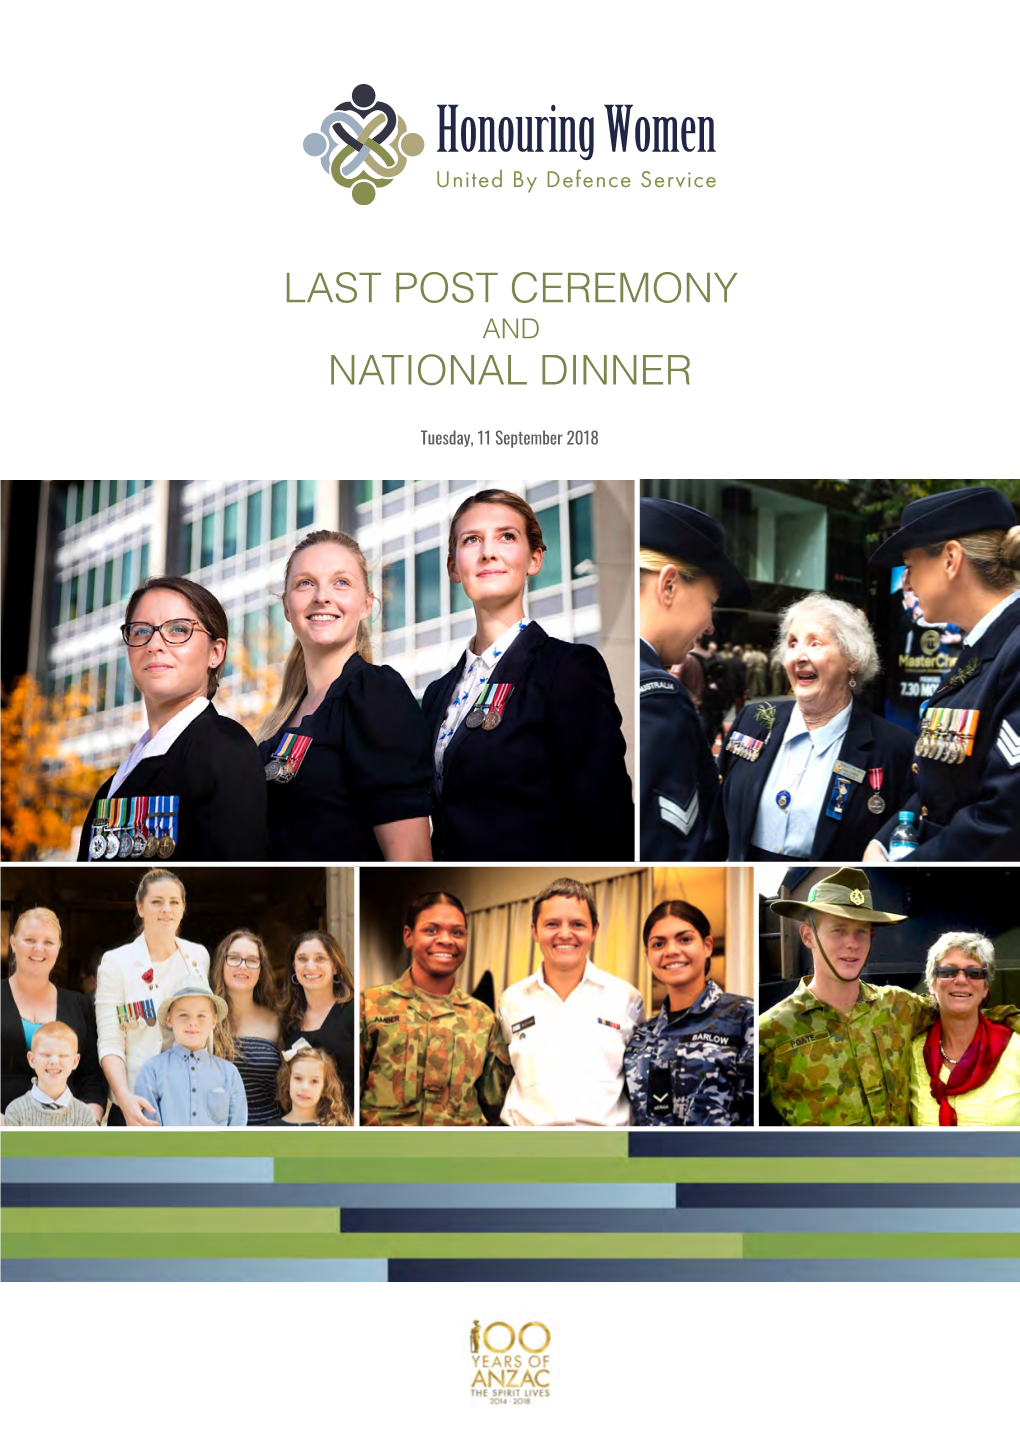 Download the 2018 Dinner Booklet